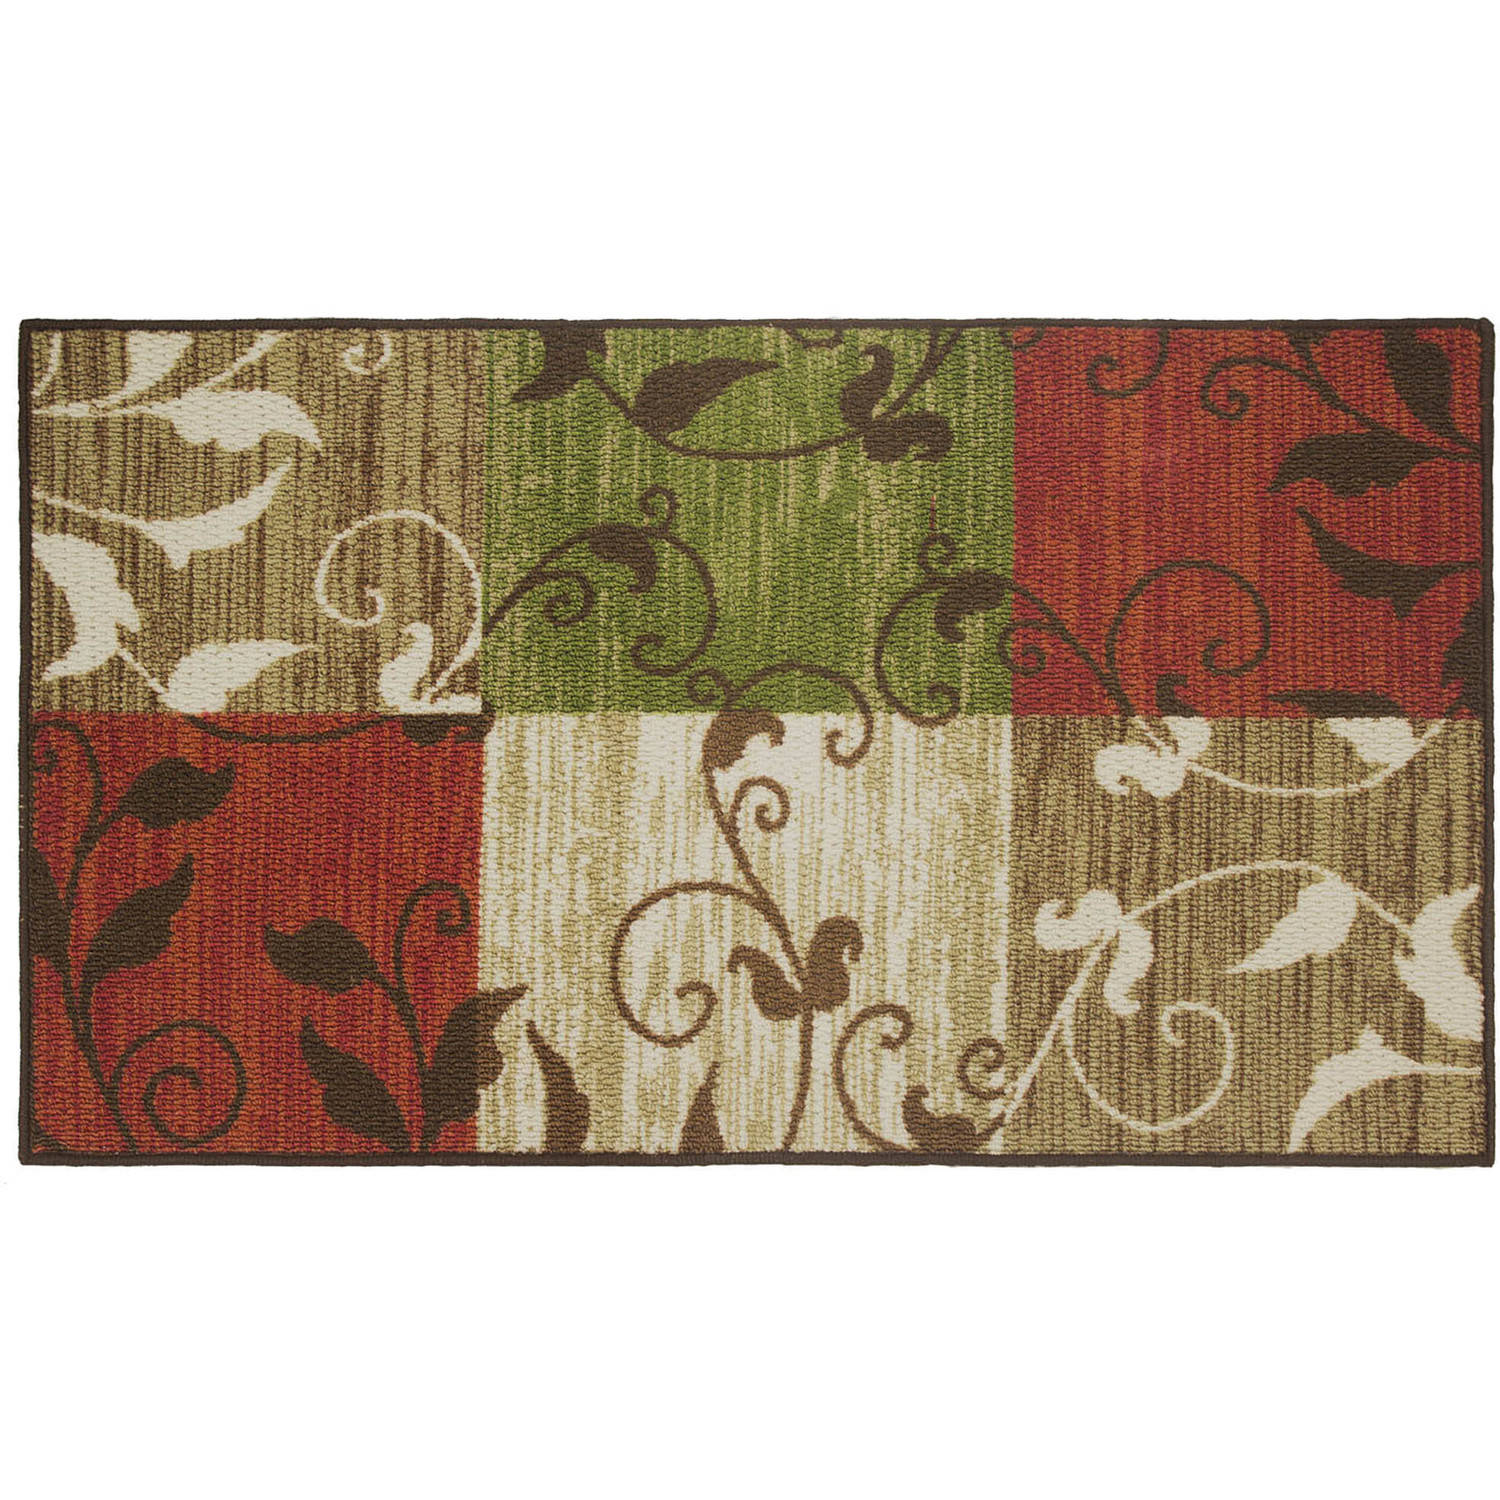 Modern Living Decorative Accent Rug - image 1 of 2